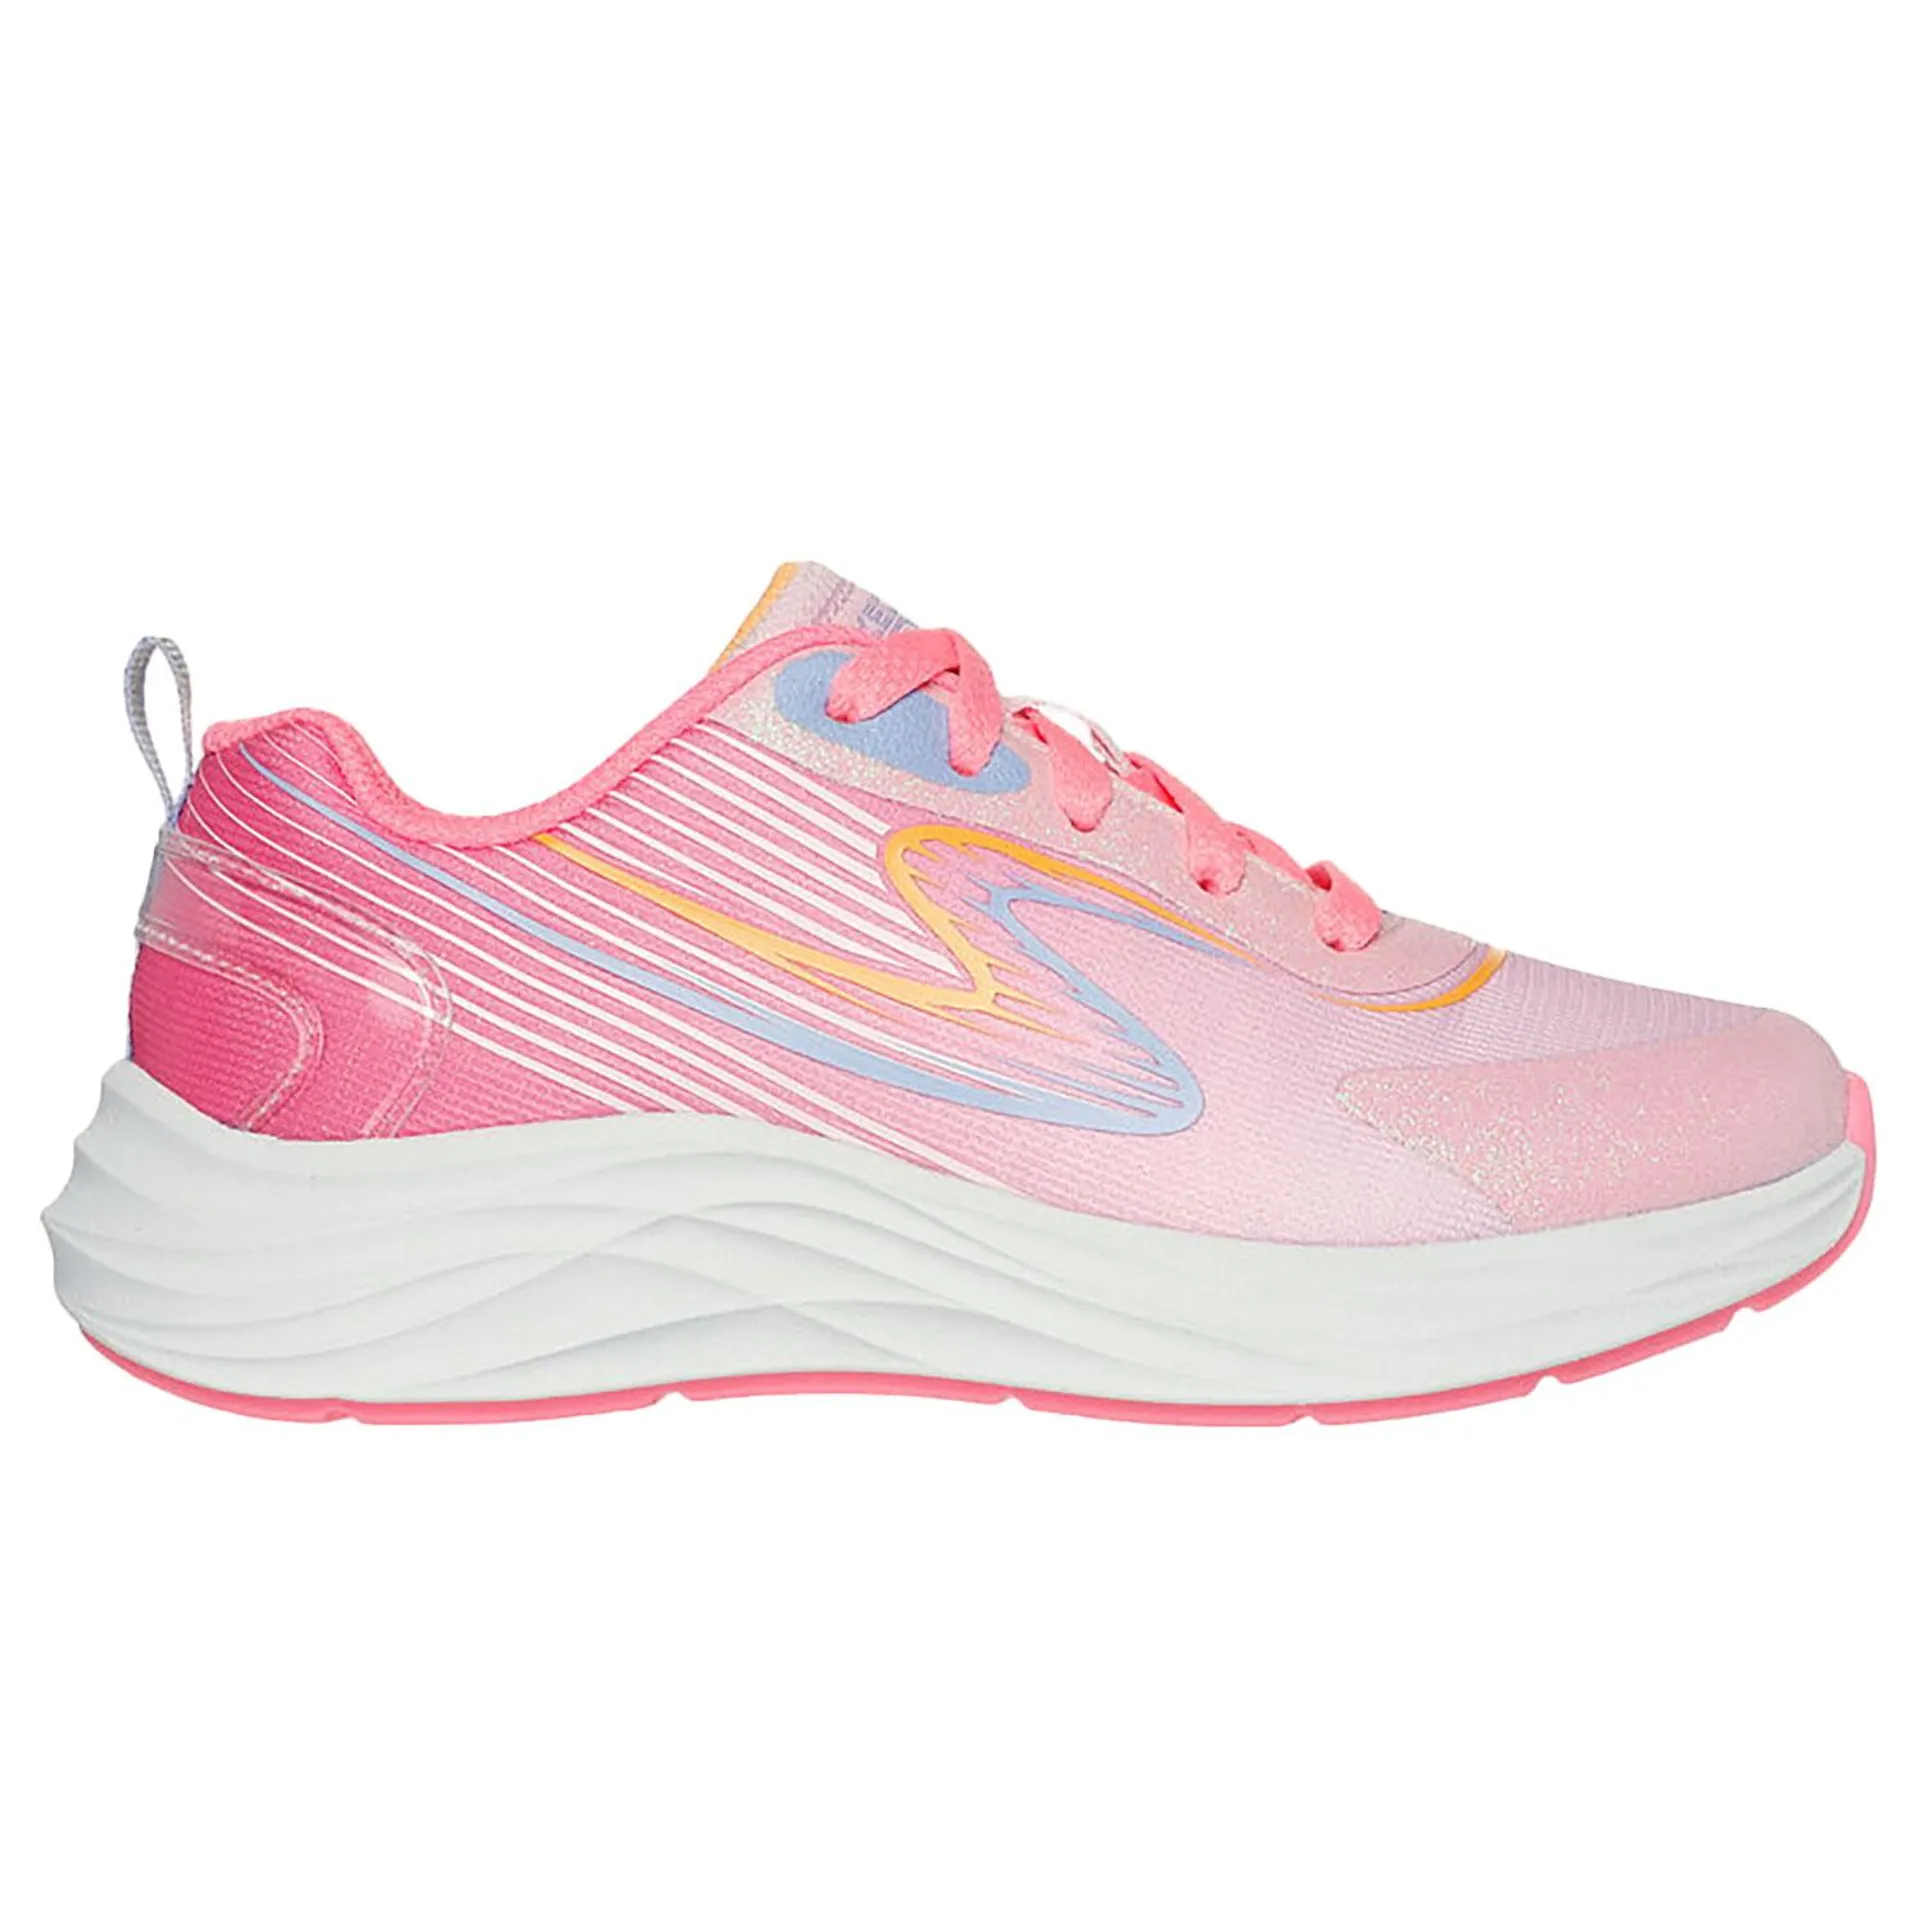 Skechers Go Run Accelerate Girls' Athletic Shoes